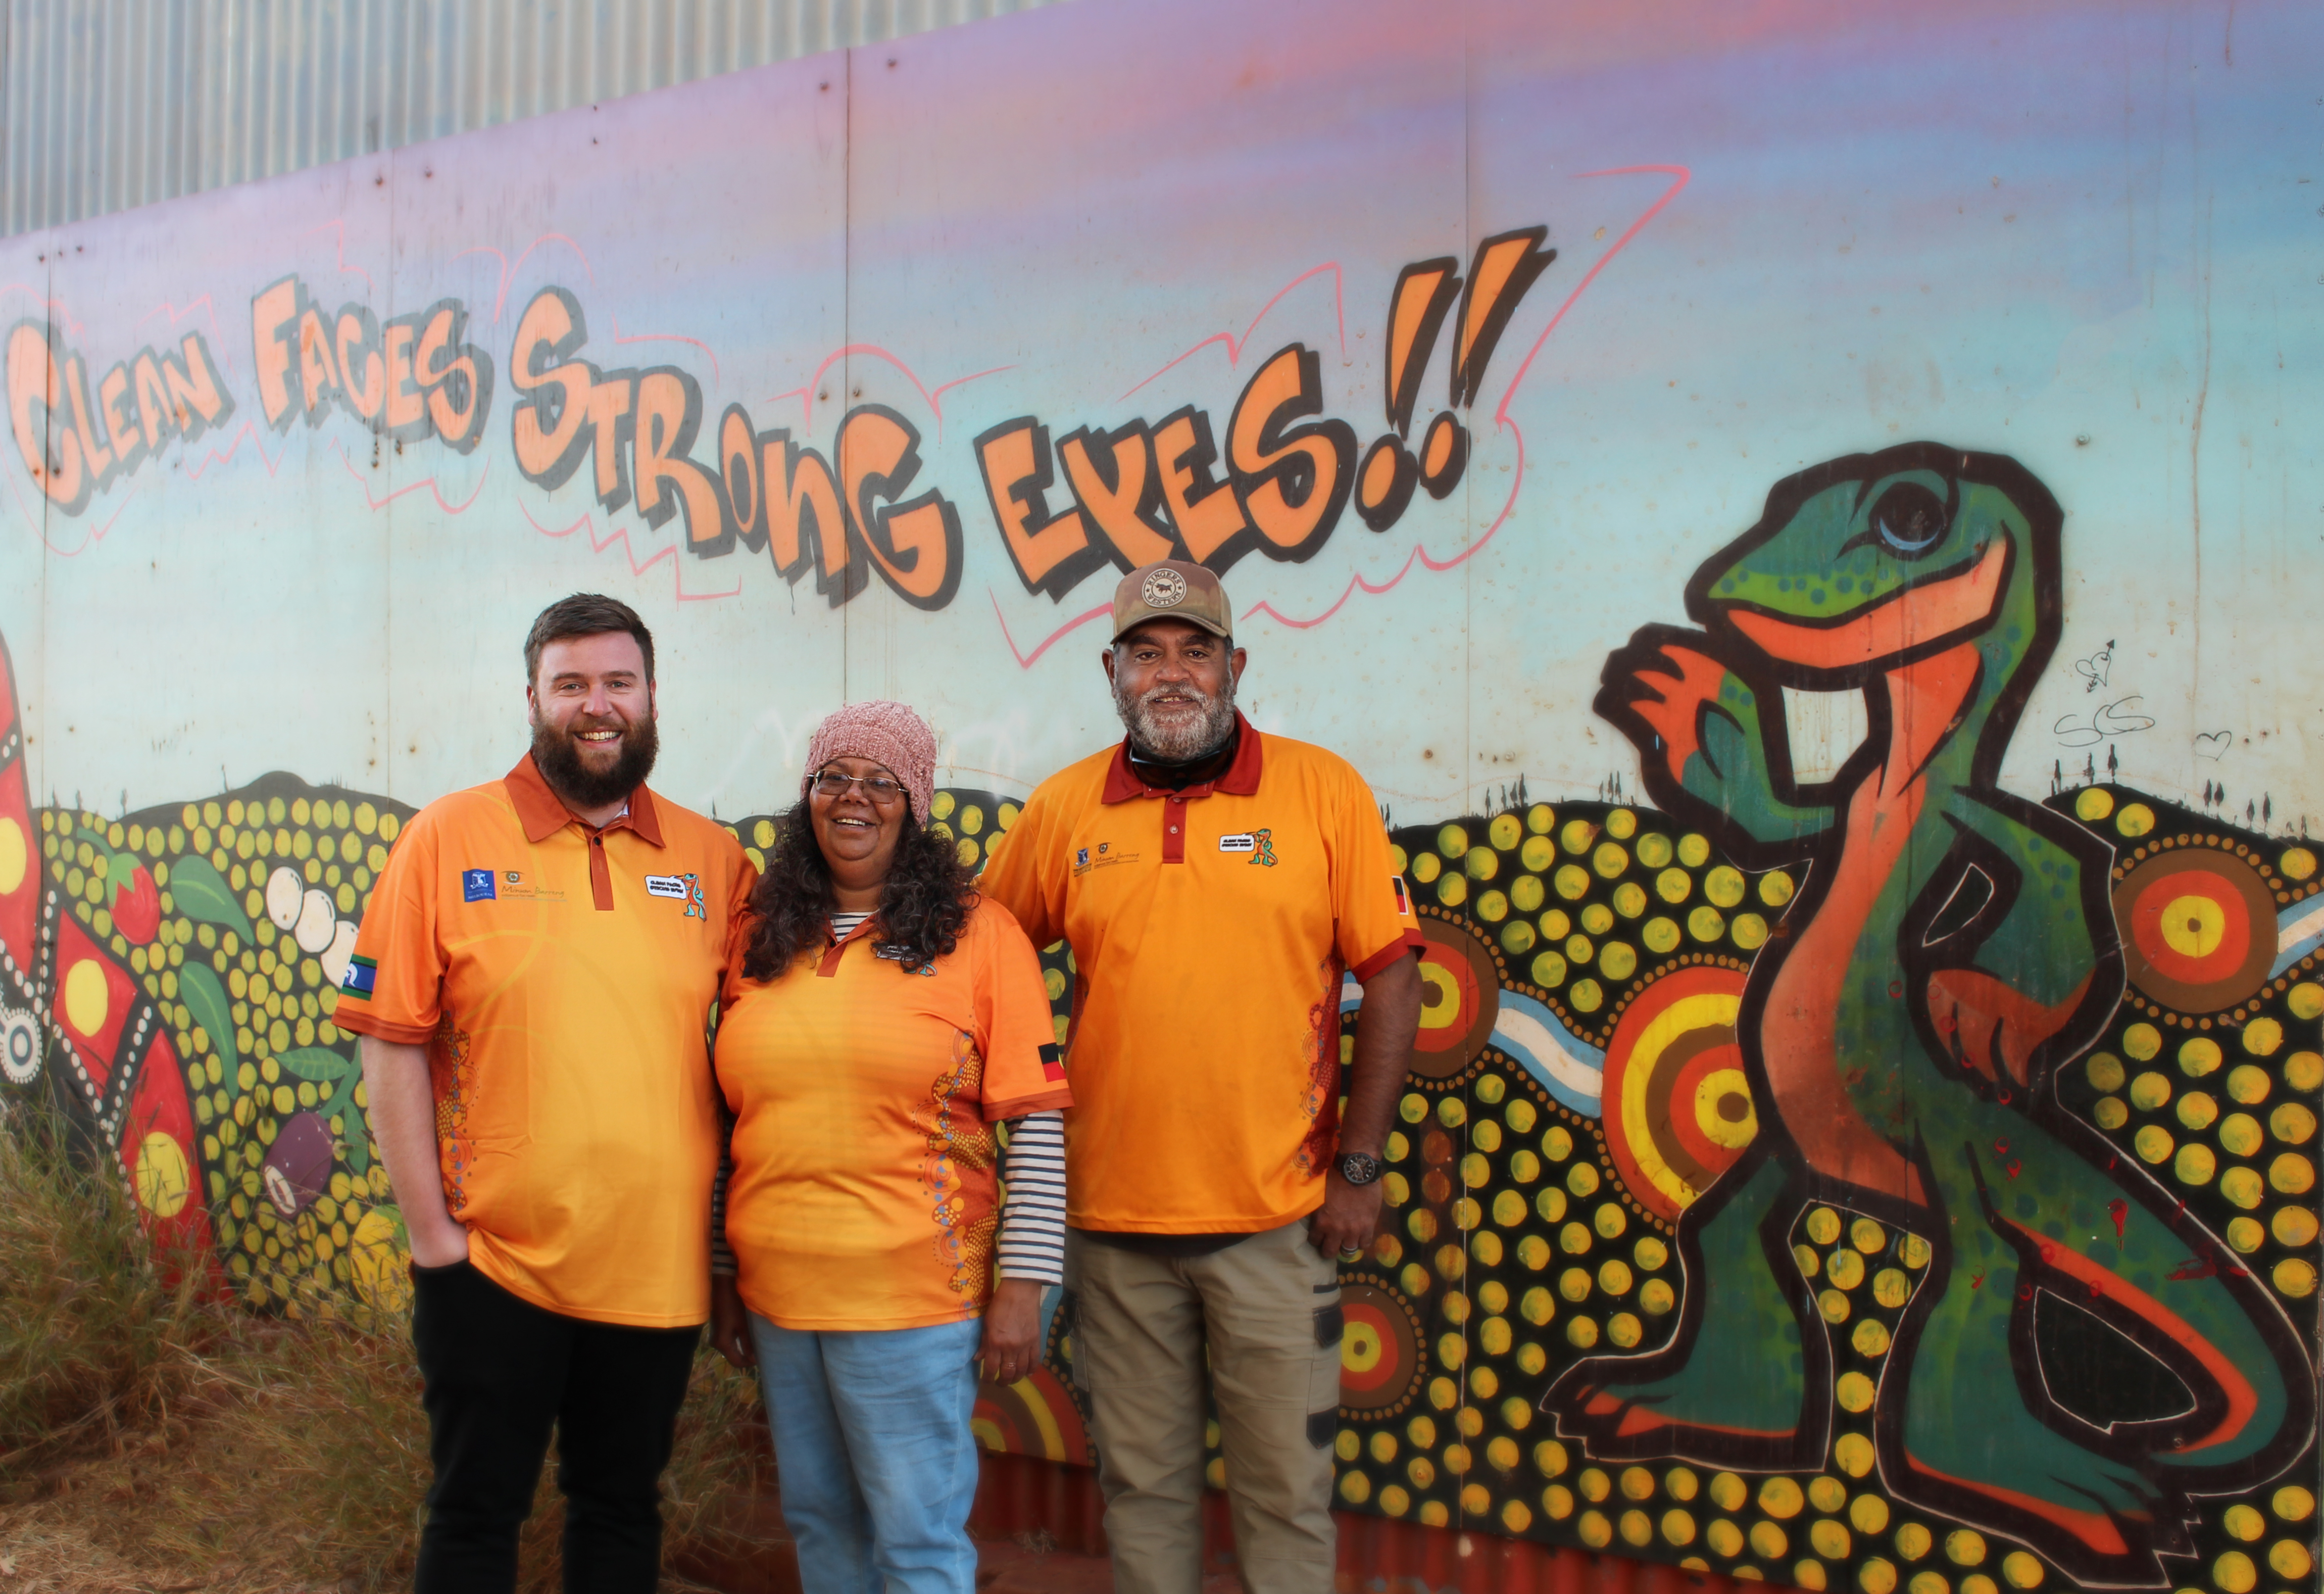 Nick, Lesley and Walter standing together in front of a colourful painted mural